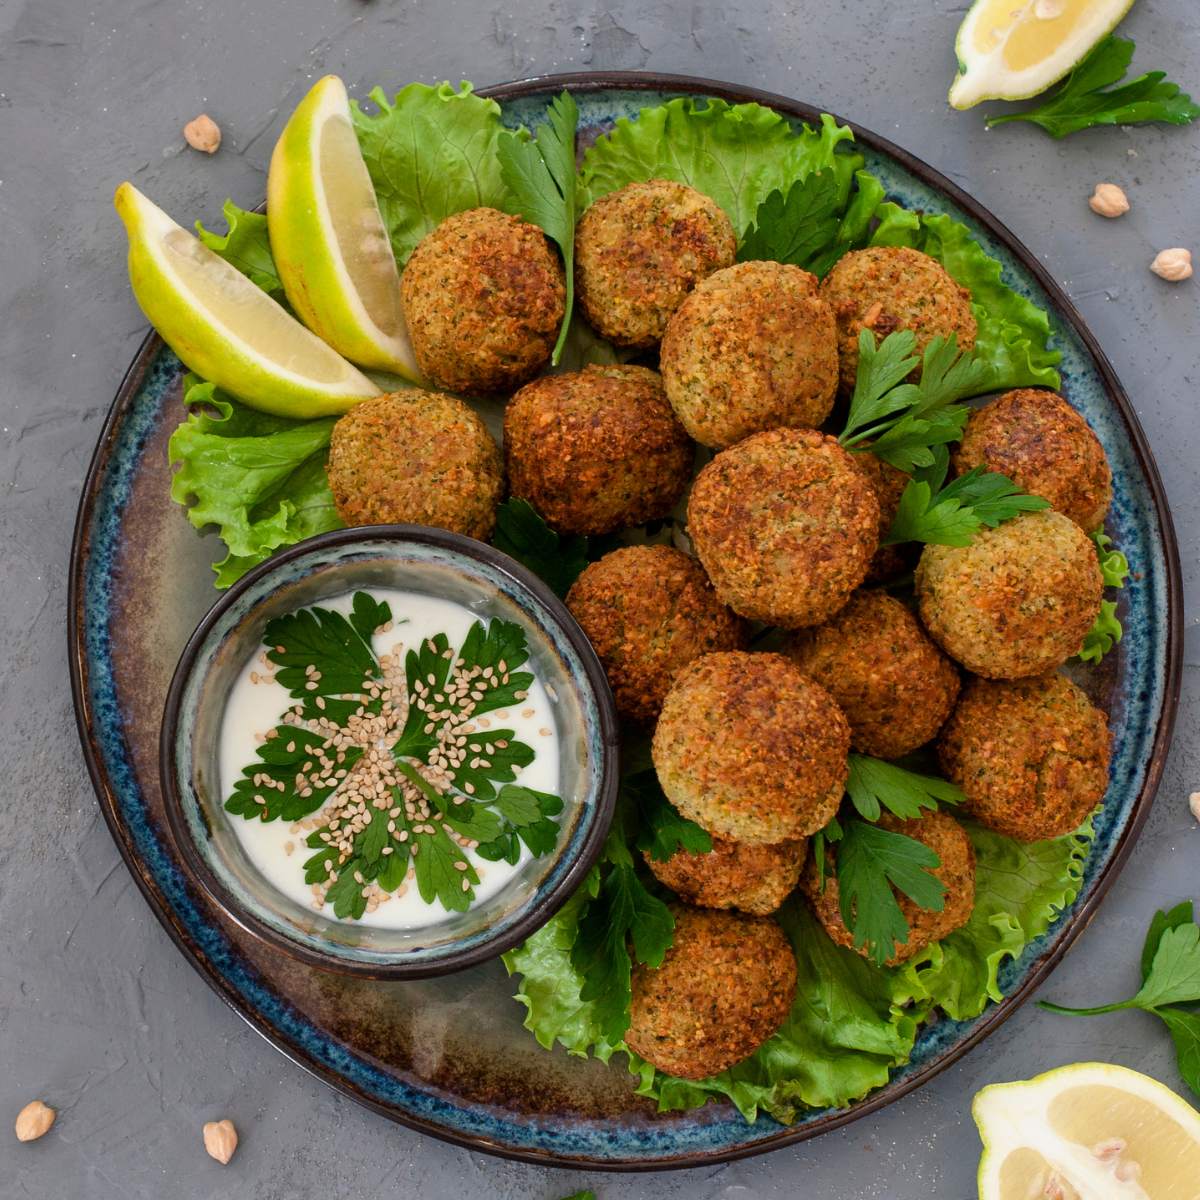 What is Falafel made of